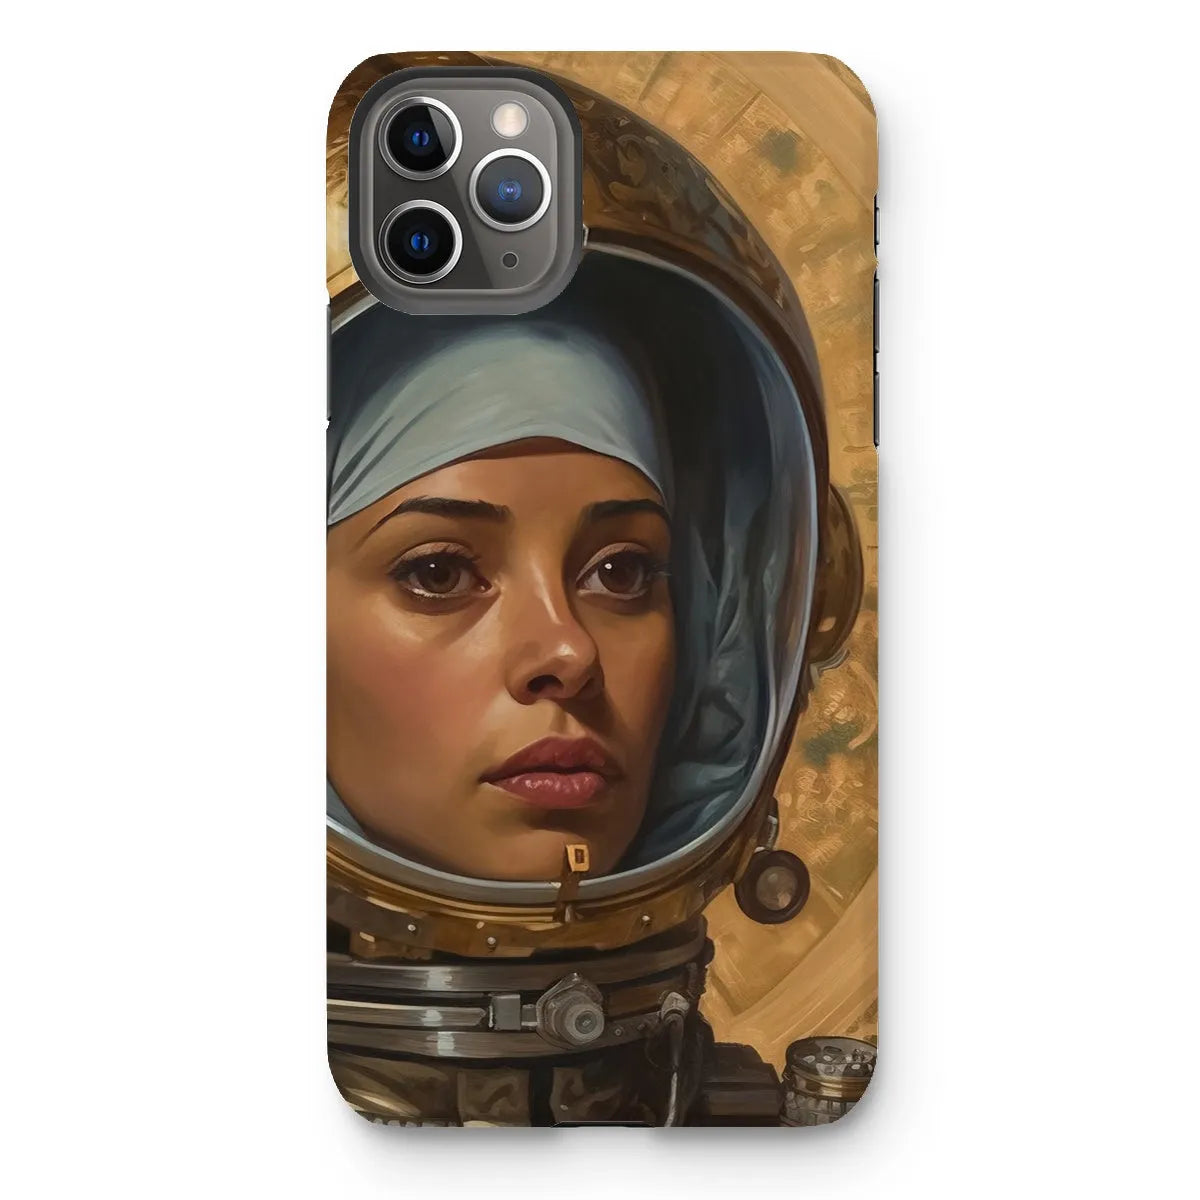 Amira The Lesbian Astronaut - Sapphic Aesthetic Phone Case - Iphone 11 Pro Max / Matte - Mobile Phone Cases - Aesthetic